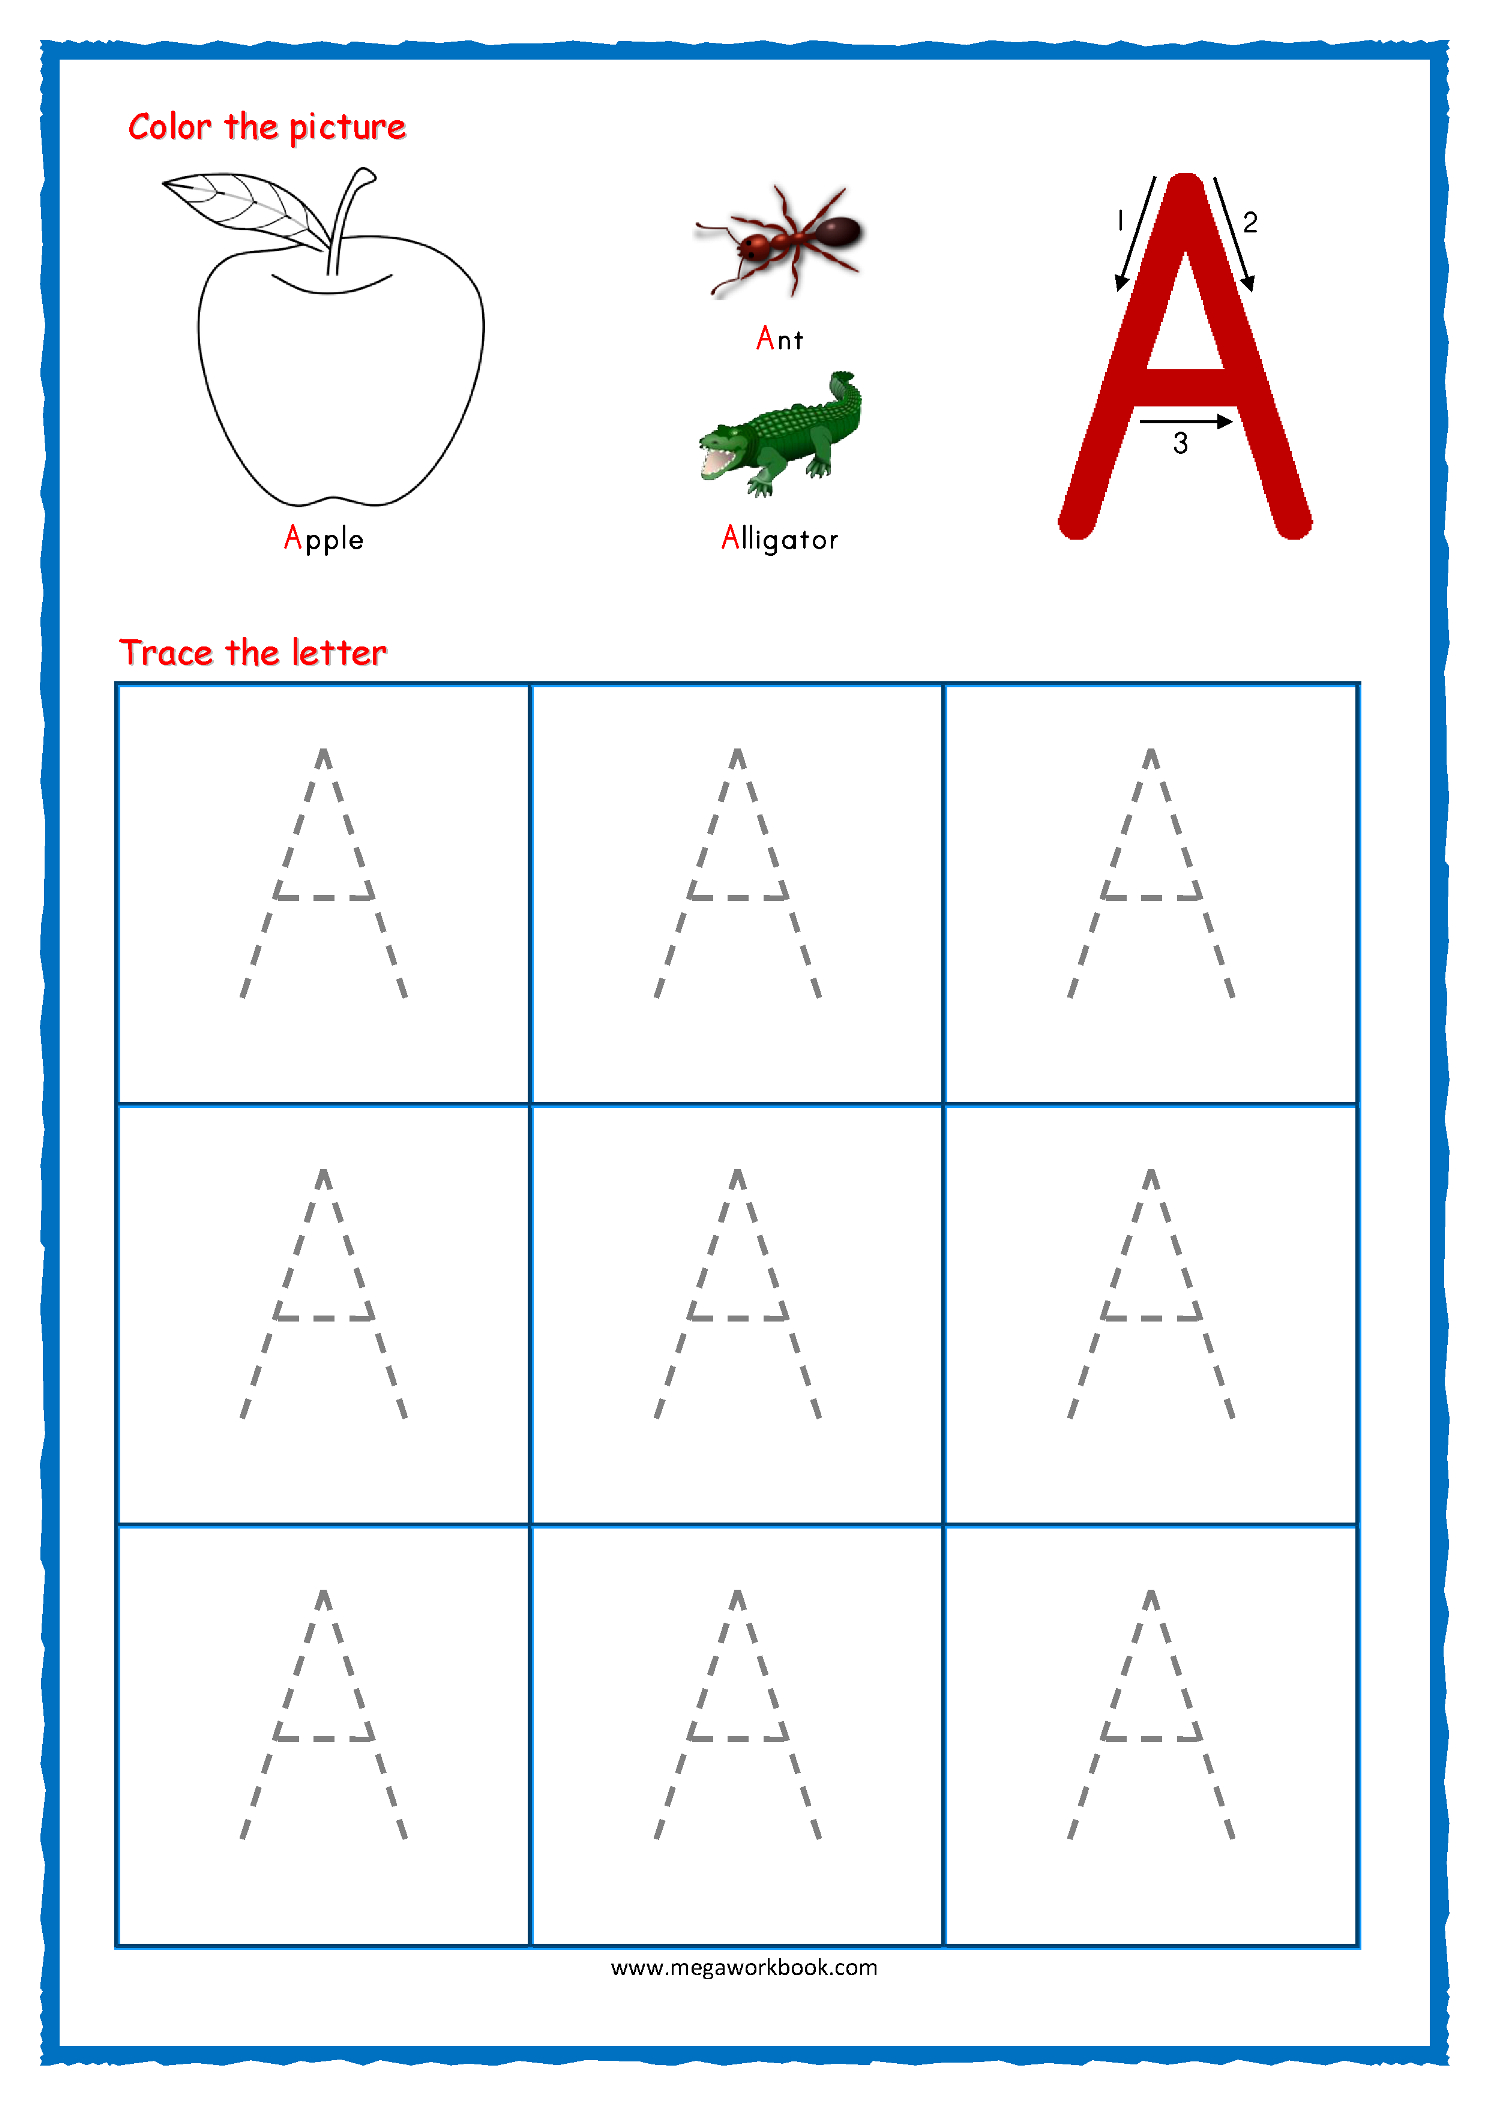 Tracing Letters - Alphabet Tracing - Capital Letters throughout Tracing Letters Worksheets For Kindergarten